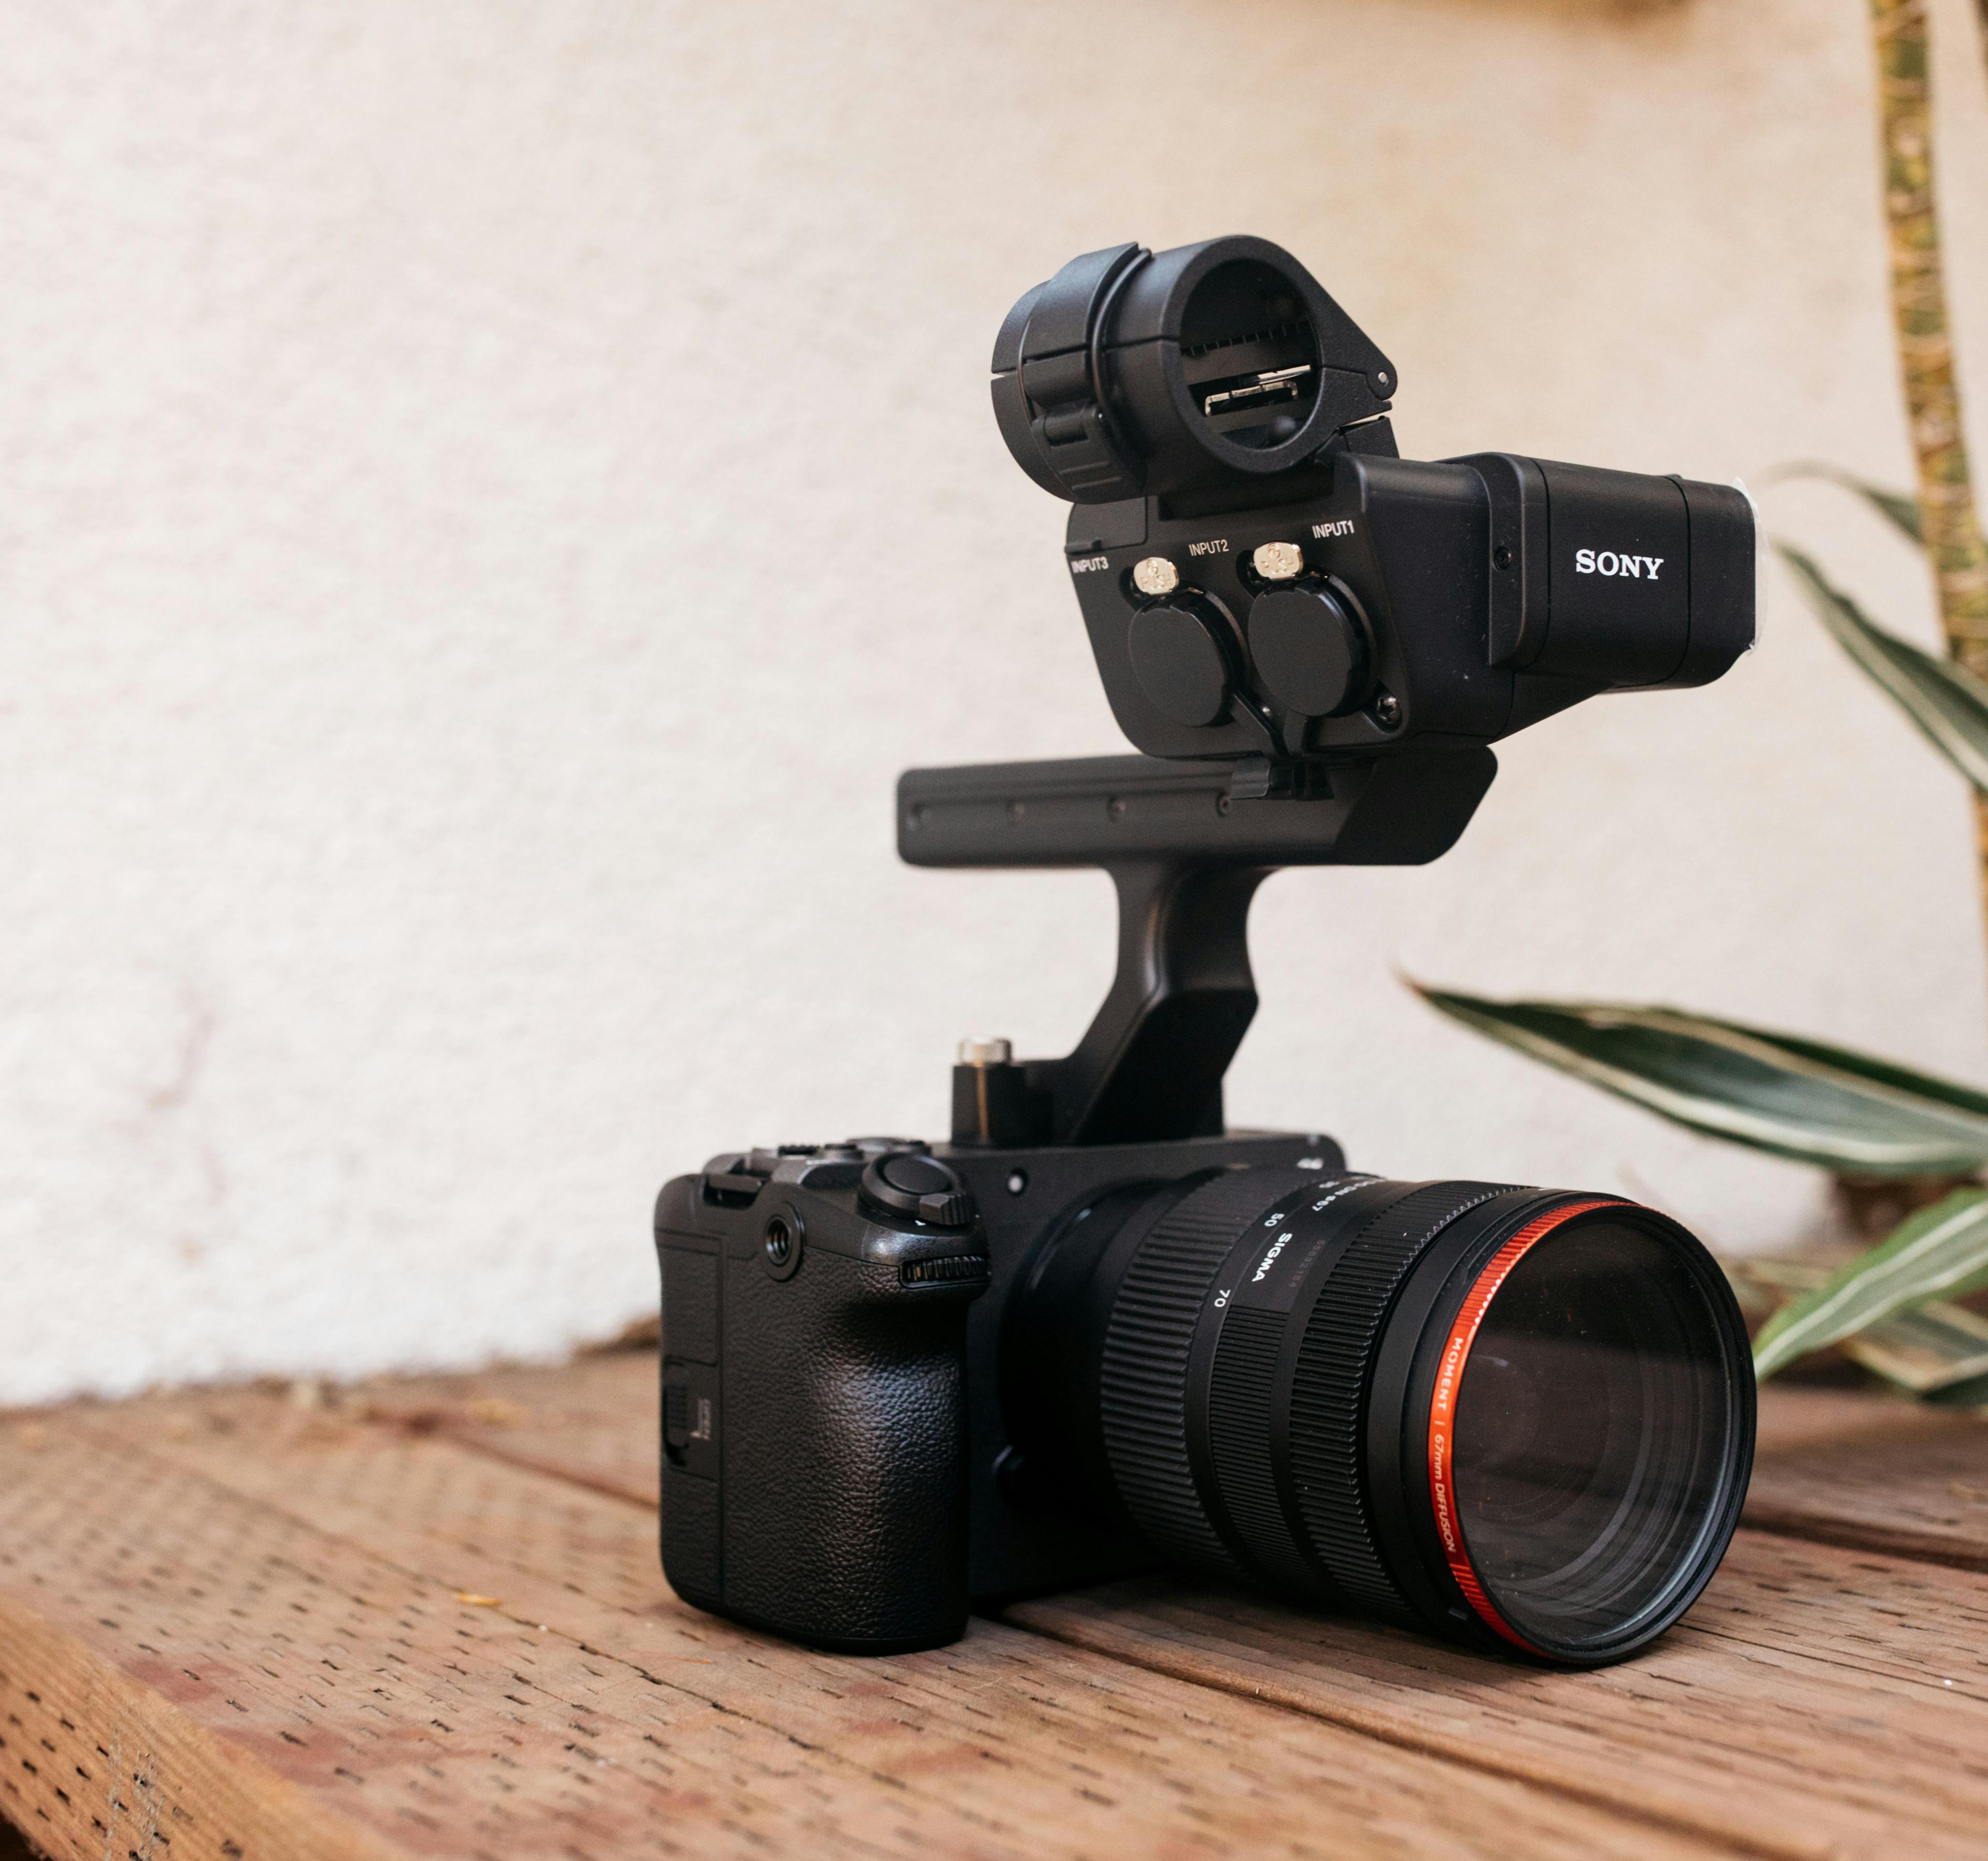 Top Cameras for Beginner Filmmakers, Sony, Canon, & More